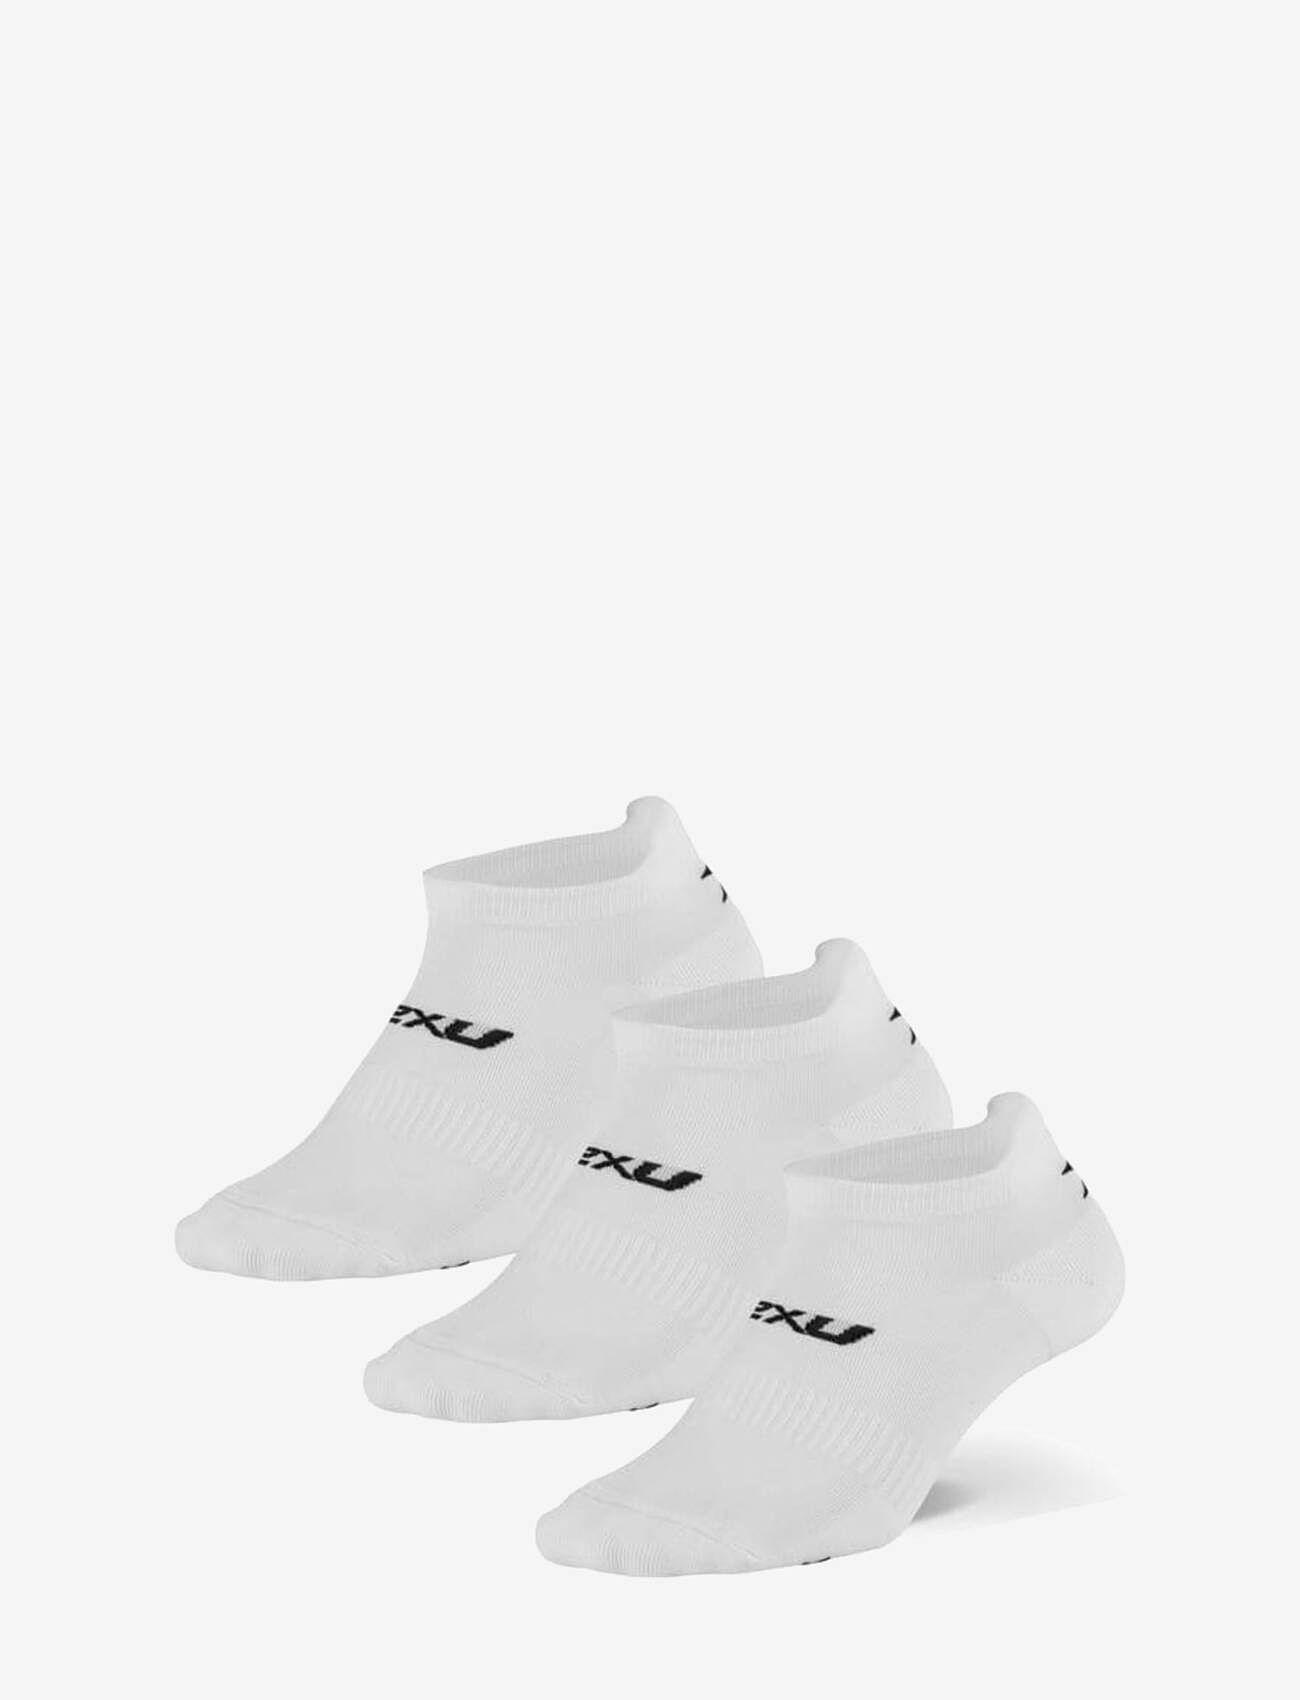 2XU - ANKLE SOCKS 3 PACK - lowest prices - white/black - 0